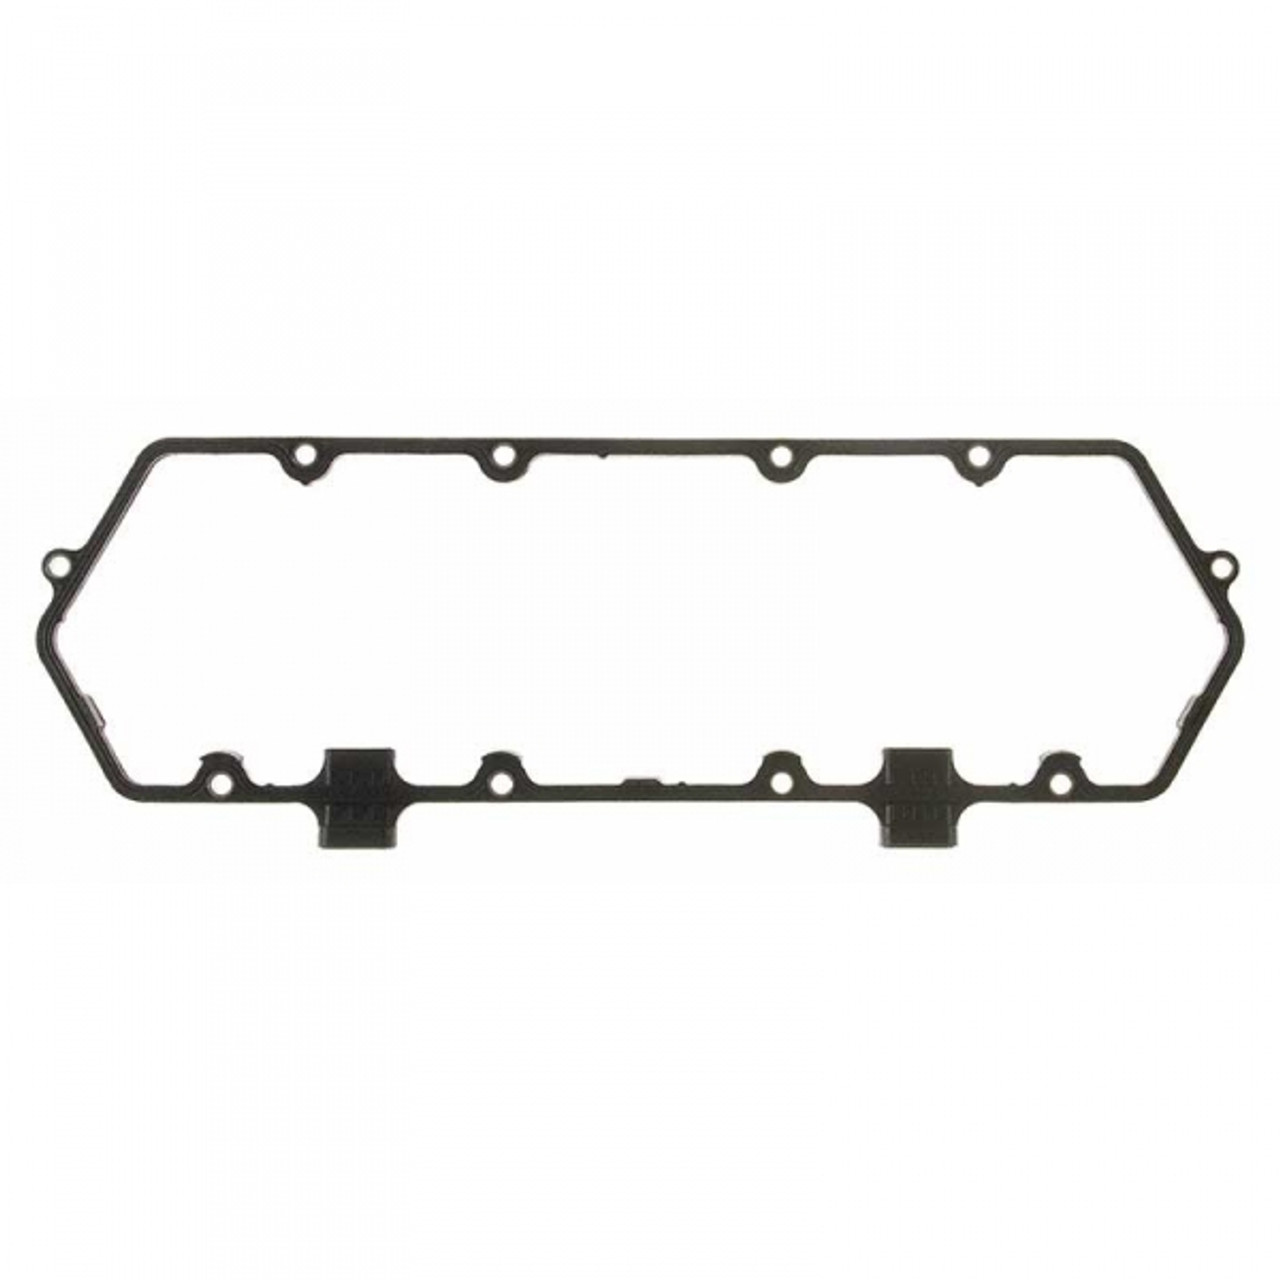 Mahle Valve Cover Gasket 1994 to 1997 7.3L Powerstroke (MCIVS50328)-Main View